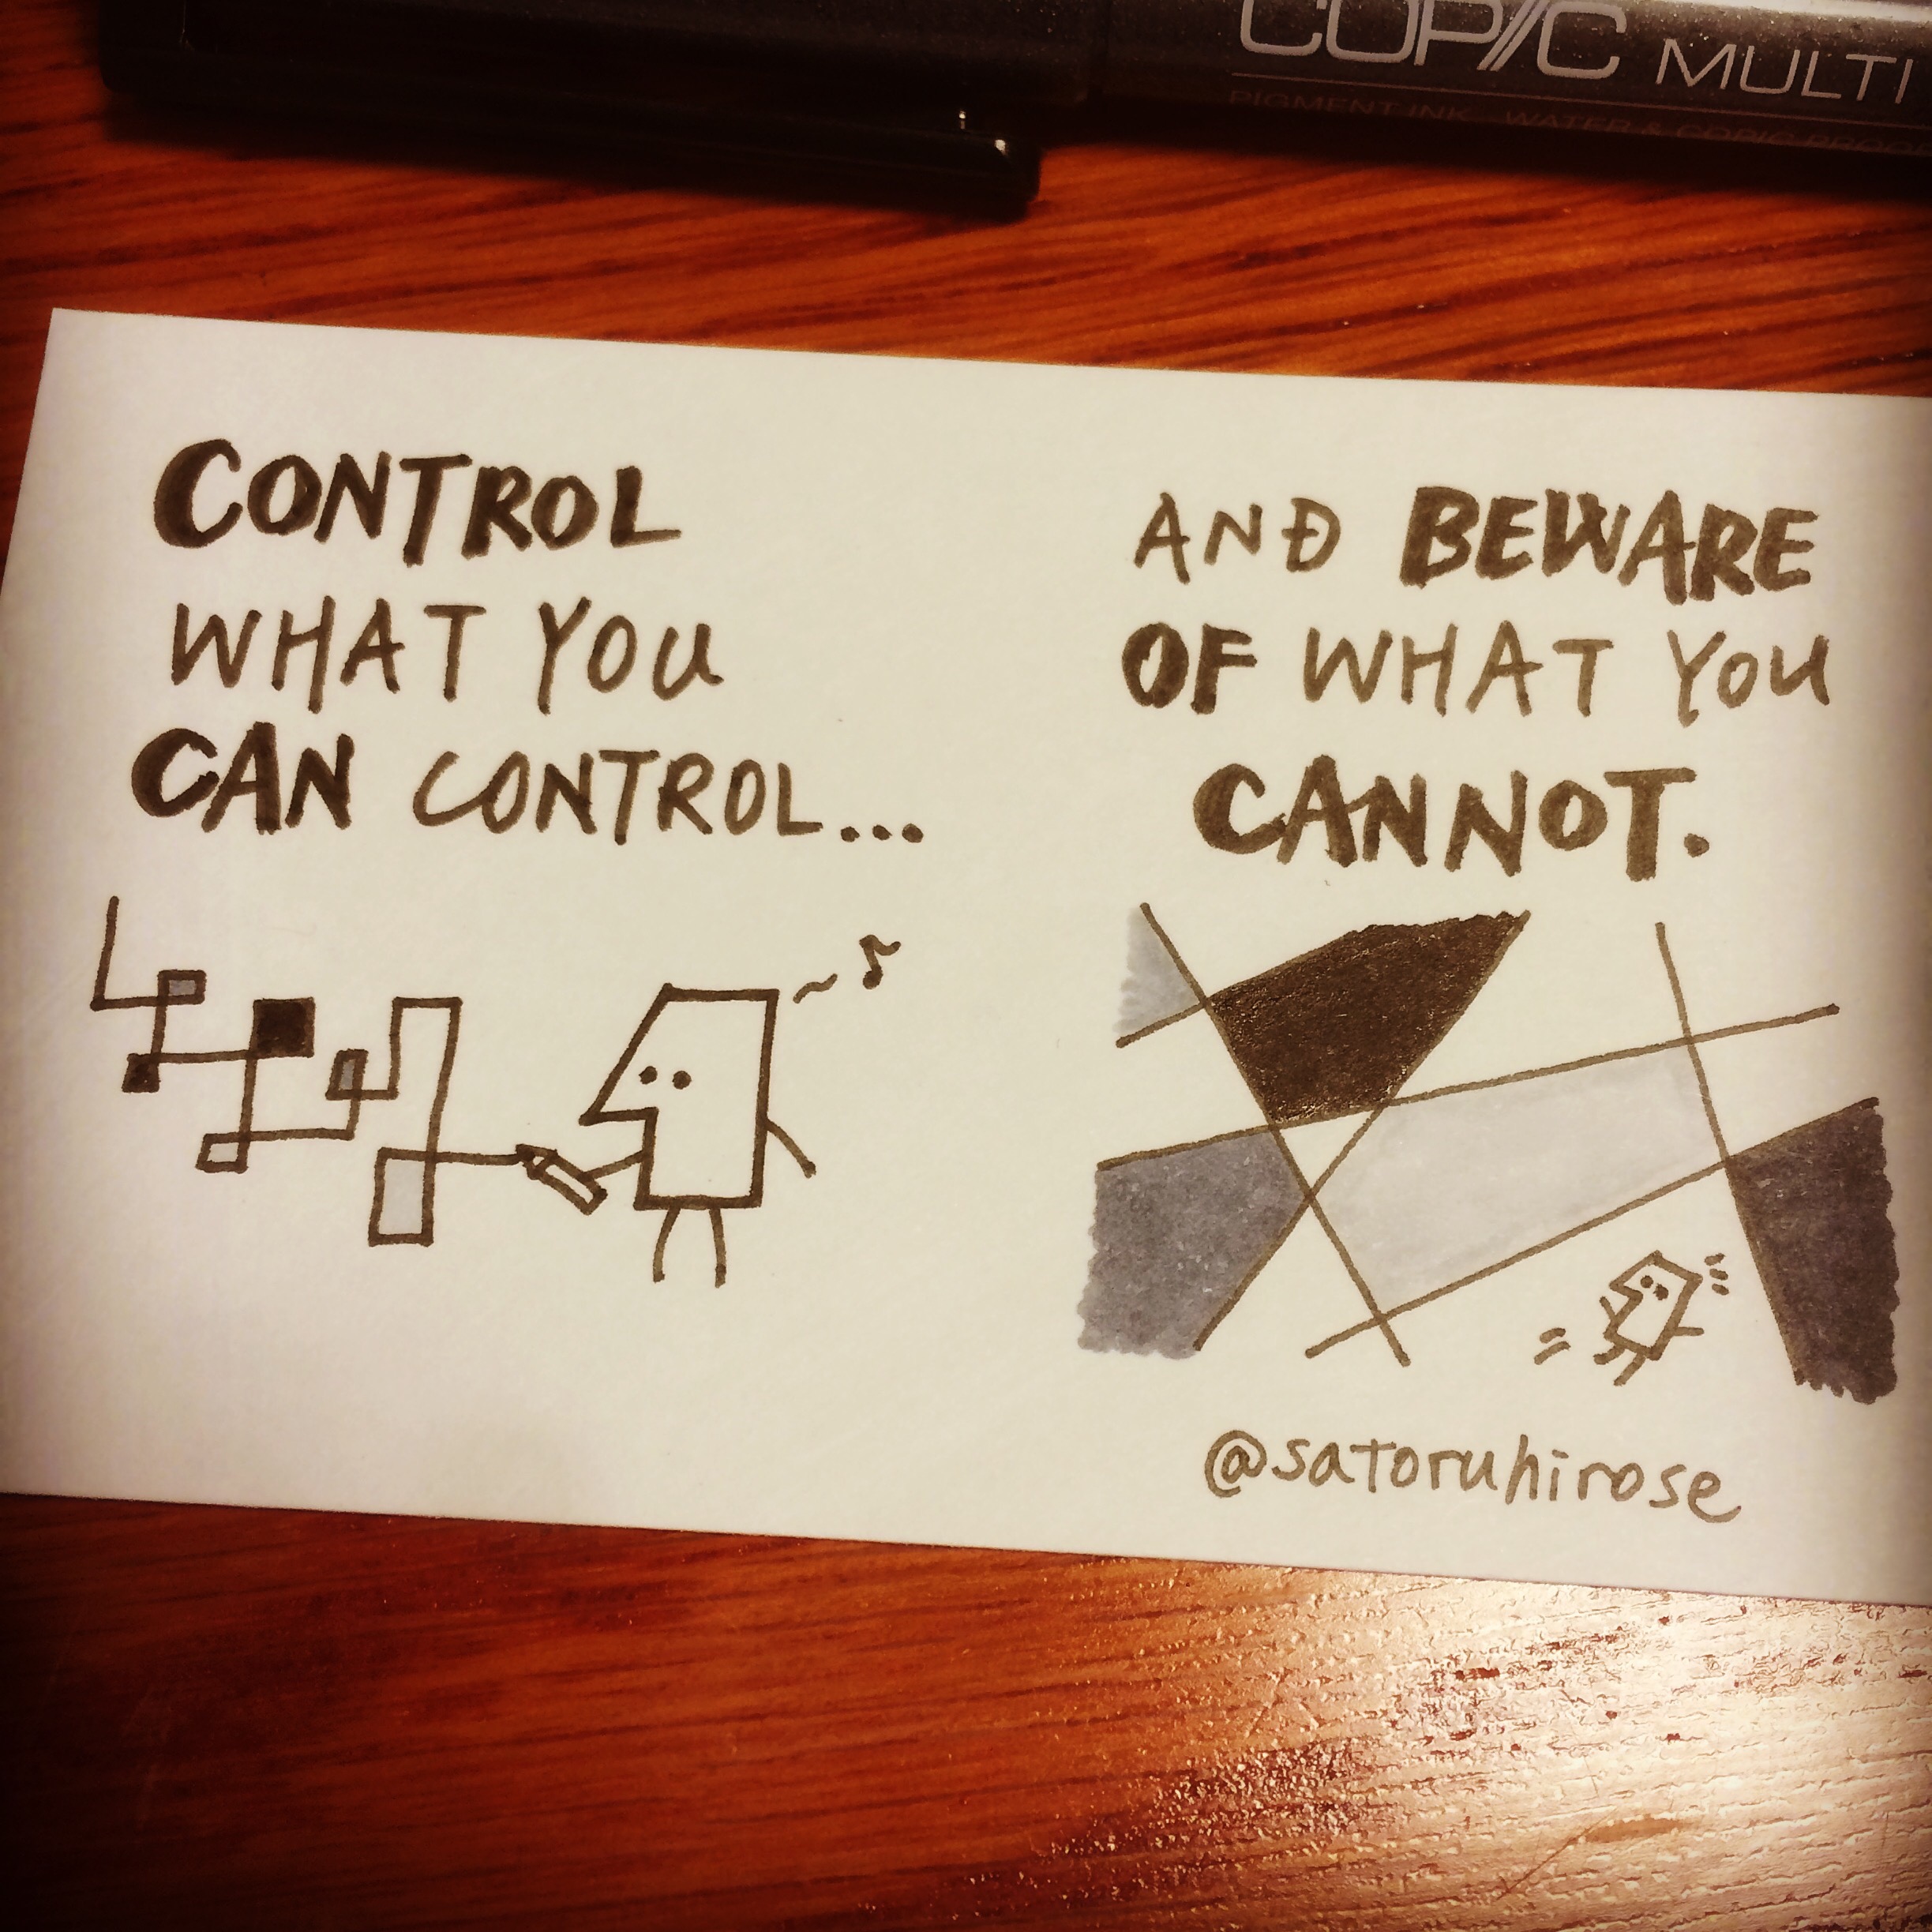 Control what you can control, and beware of what you cannot.